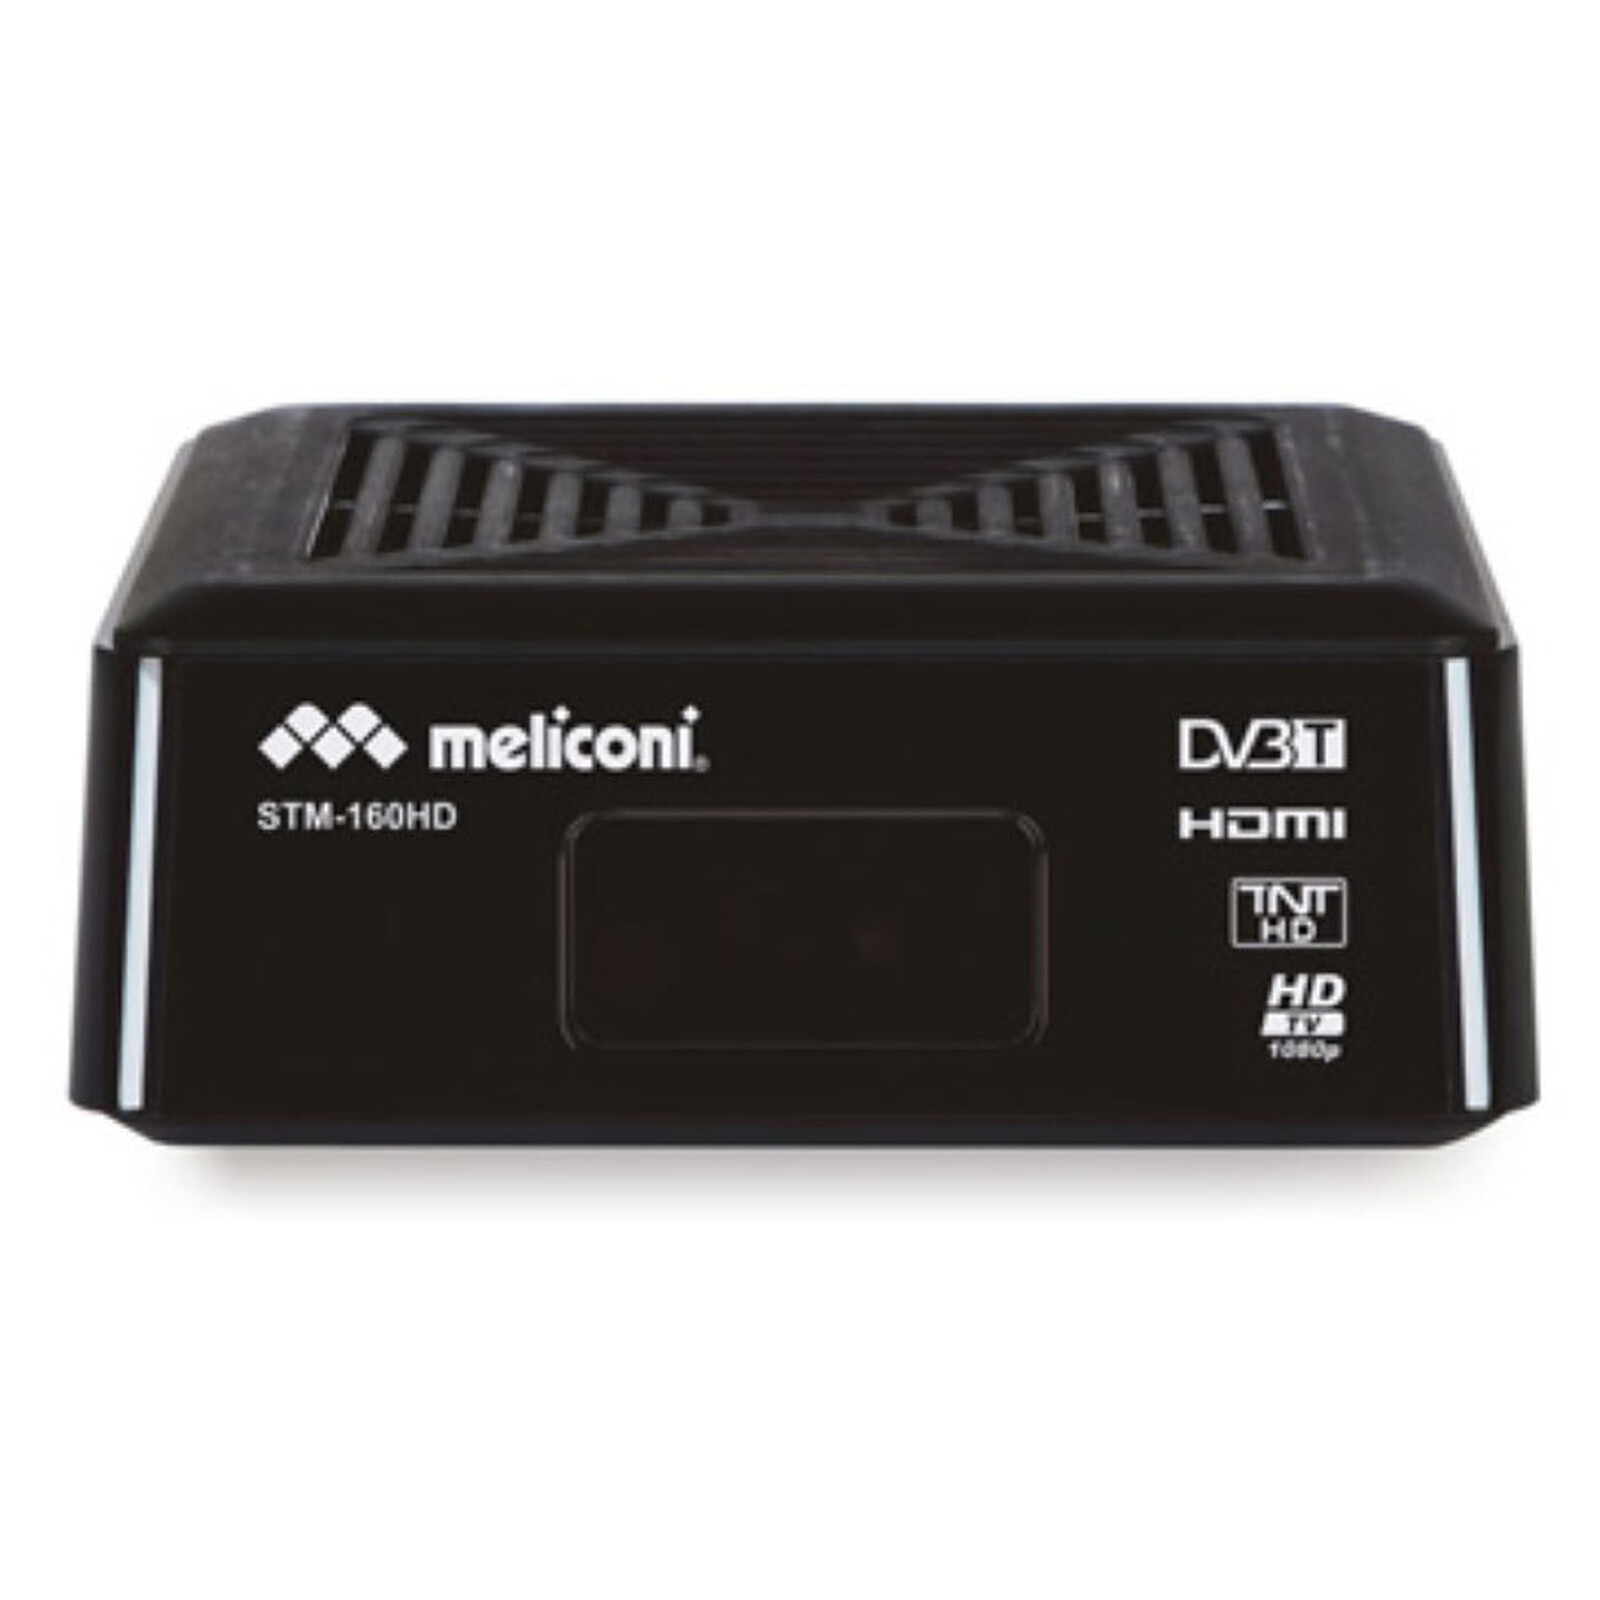 Meliconi STM-160HD Tuner Tuner TNT 